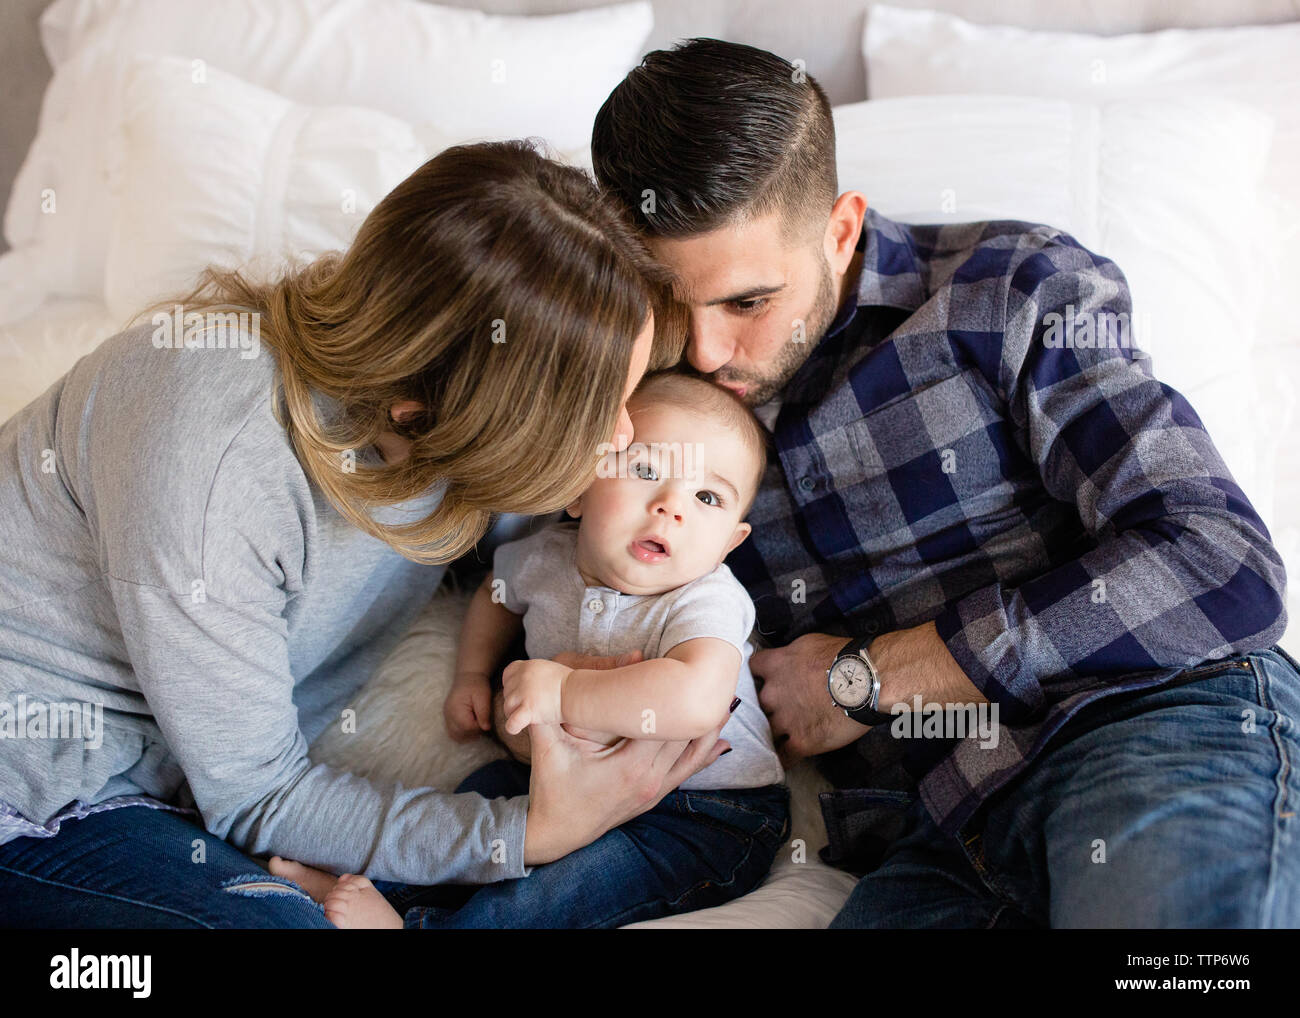 Mom and dad kissing cute baby boy on cheek indoors on bed Stock Photo